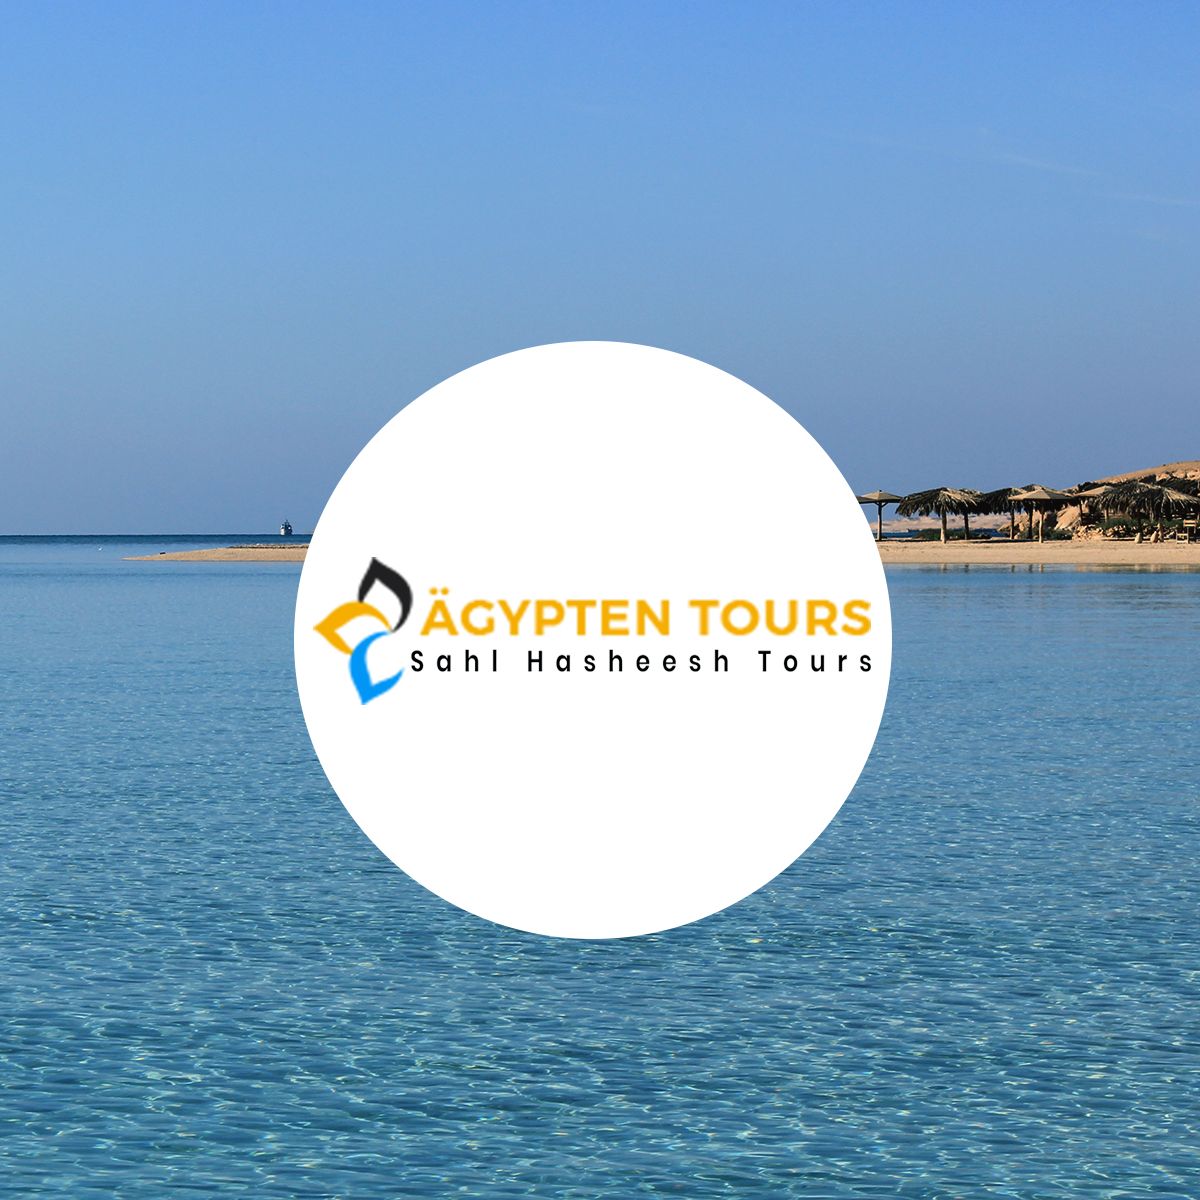 About Sahl Hasheesh Tours